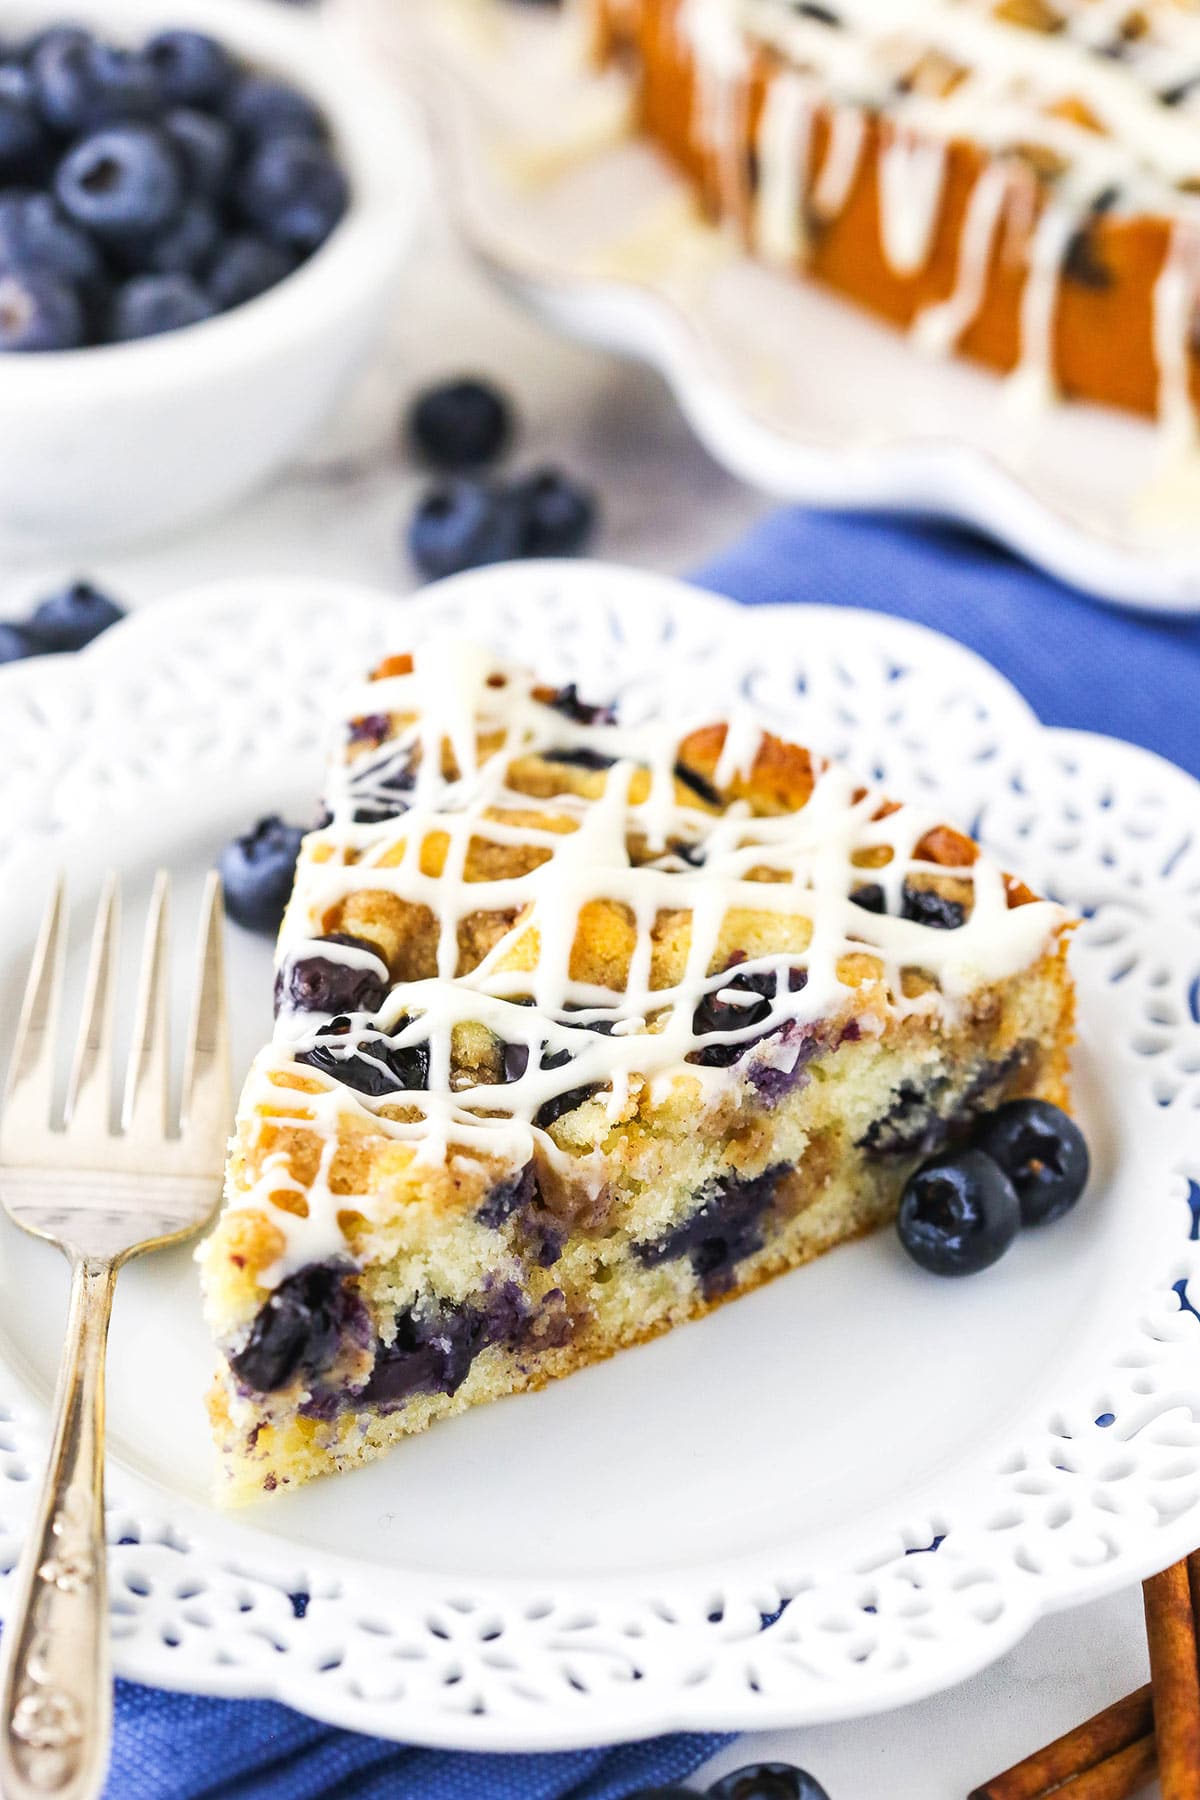 Aggregate 61+ blueberry coffee cake best - awesomeenglish.edu.vn